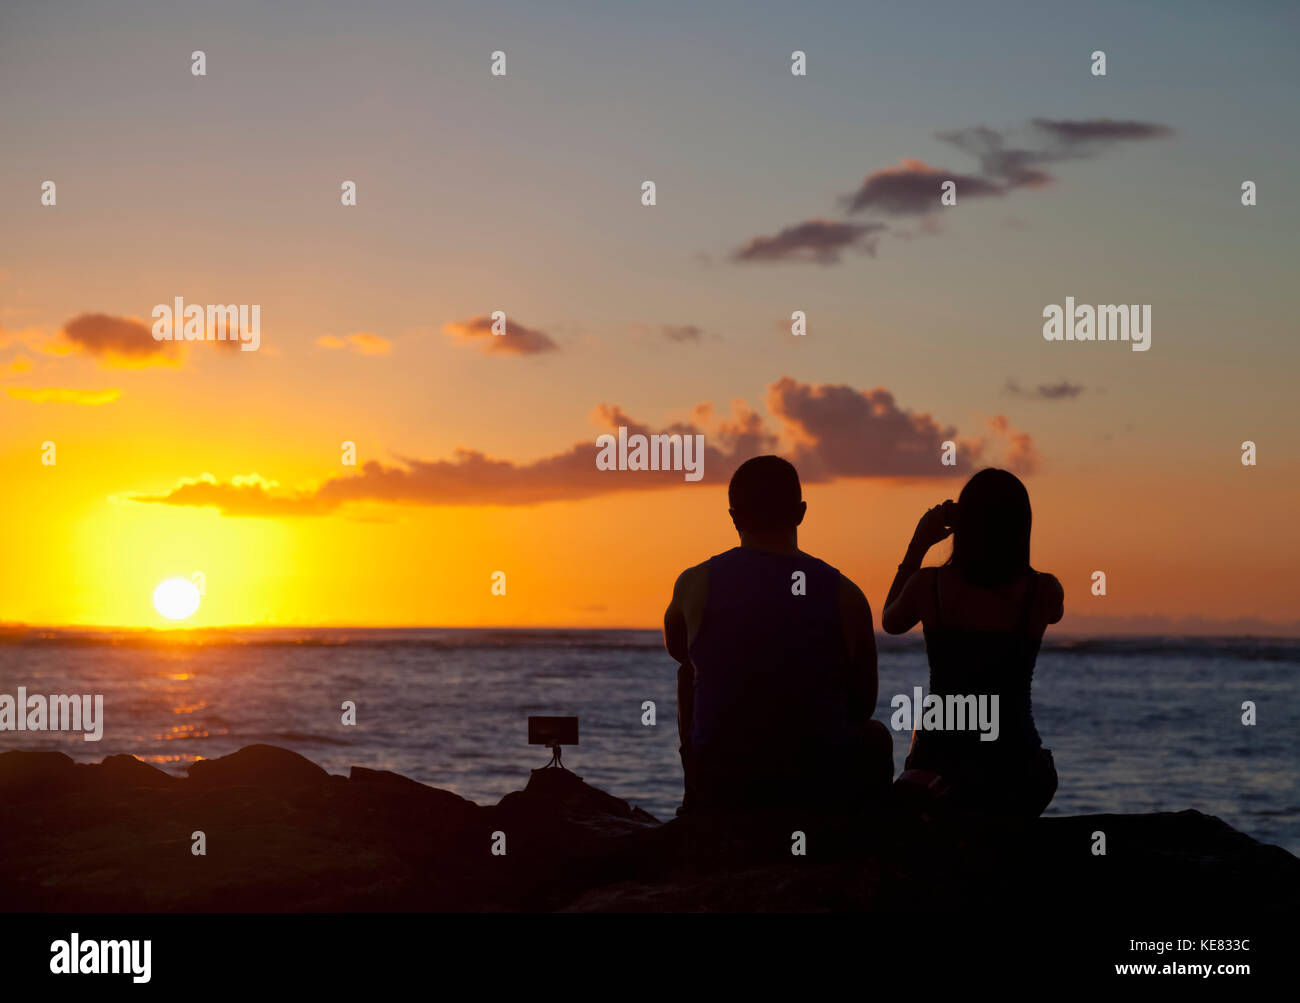 Silhouette of a couple taking pictures and watching the sunset on the beach, Waikiki; Honolulu, Oahu, Hawaii, United States of America Stock Photo